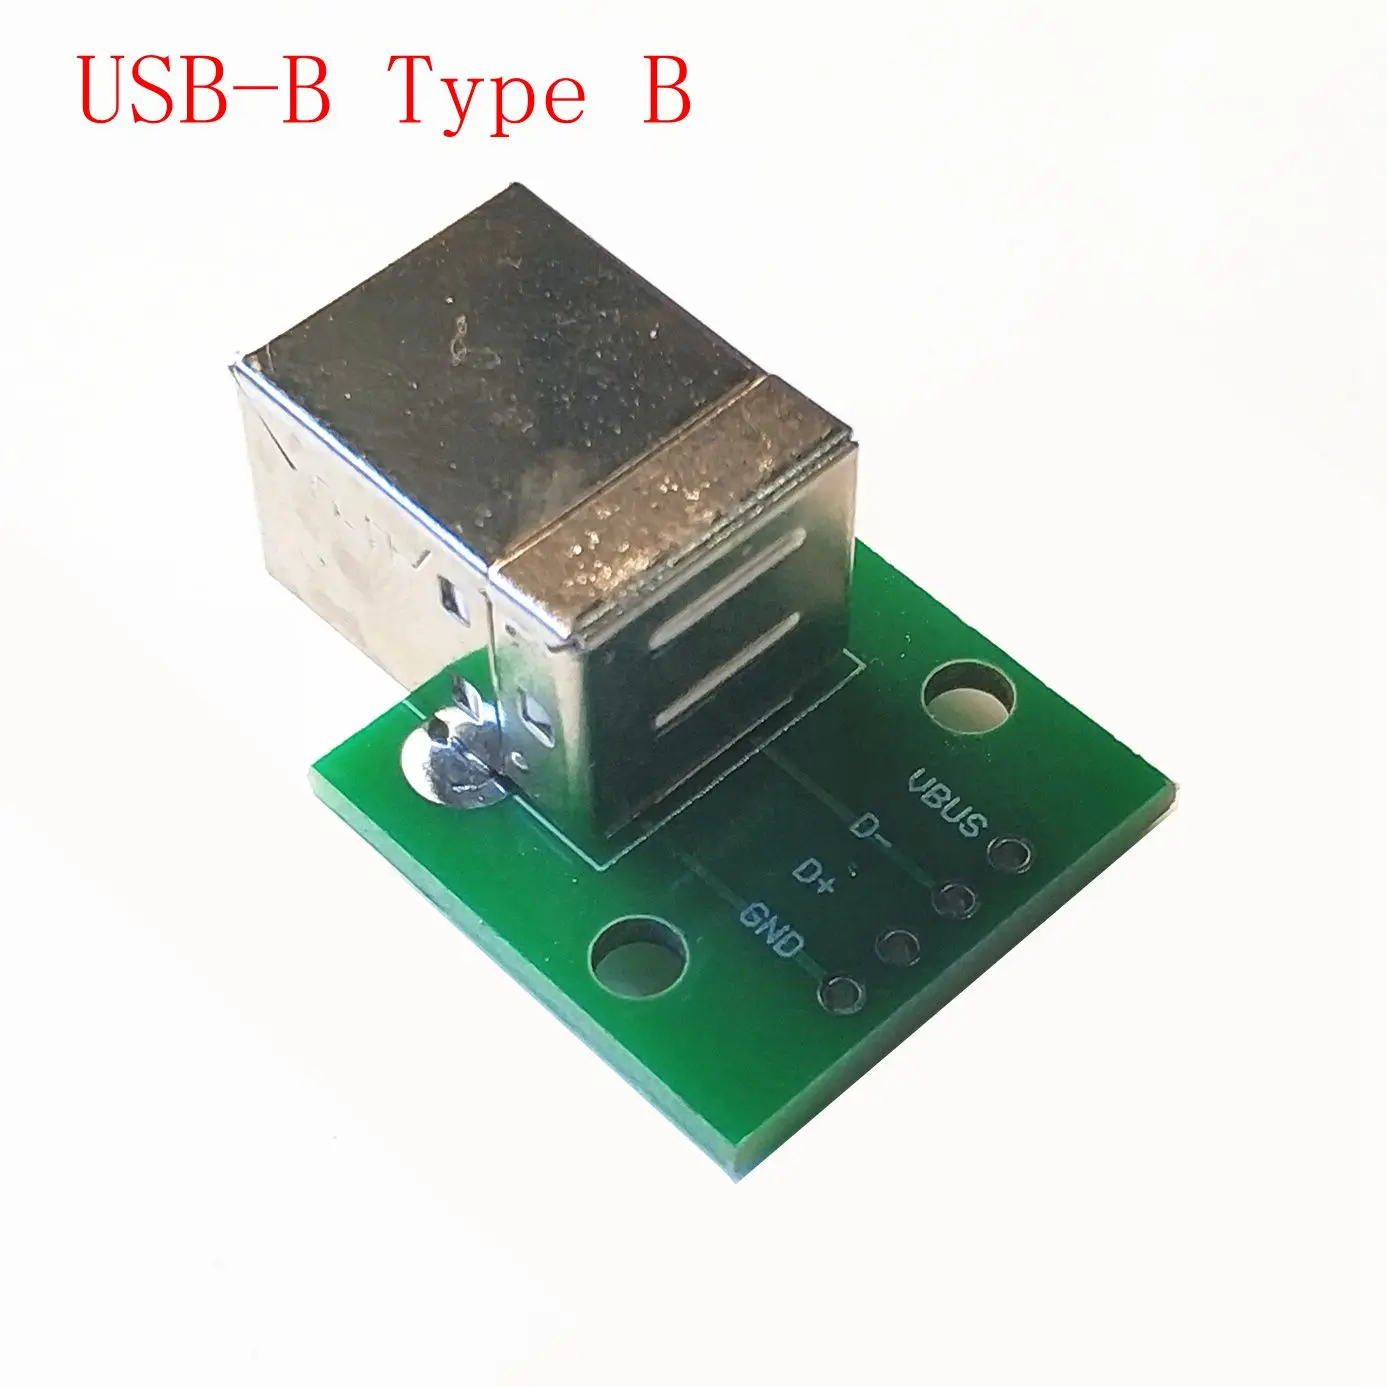 

USB-B Type B Printer Square Holder to DIP Board 2.54MM Pitch Data Cable Adaptor Board